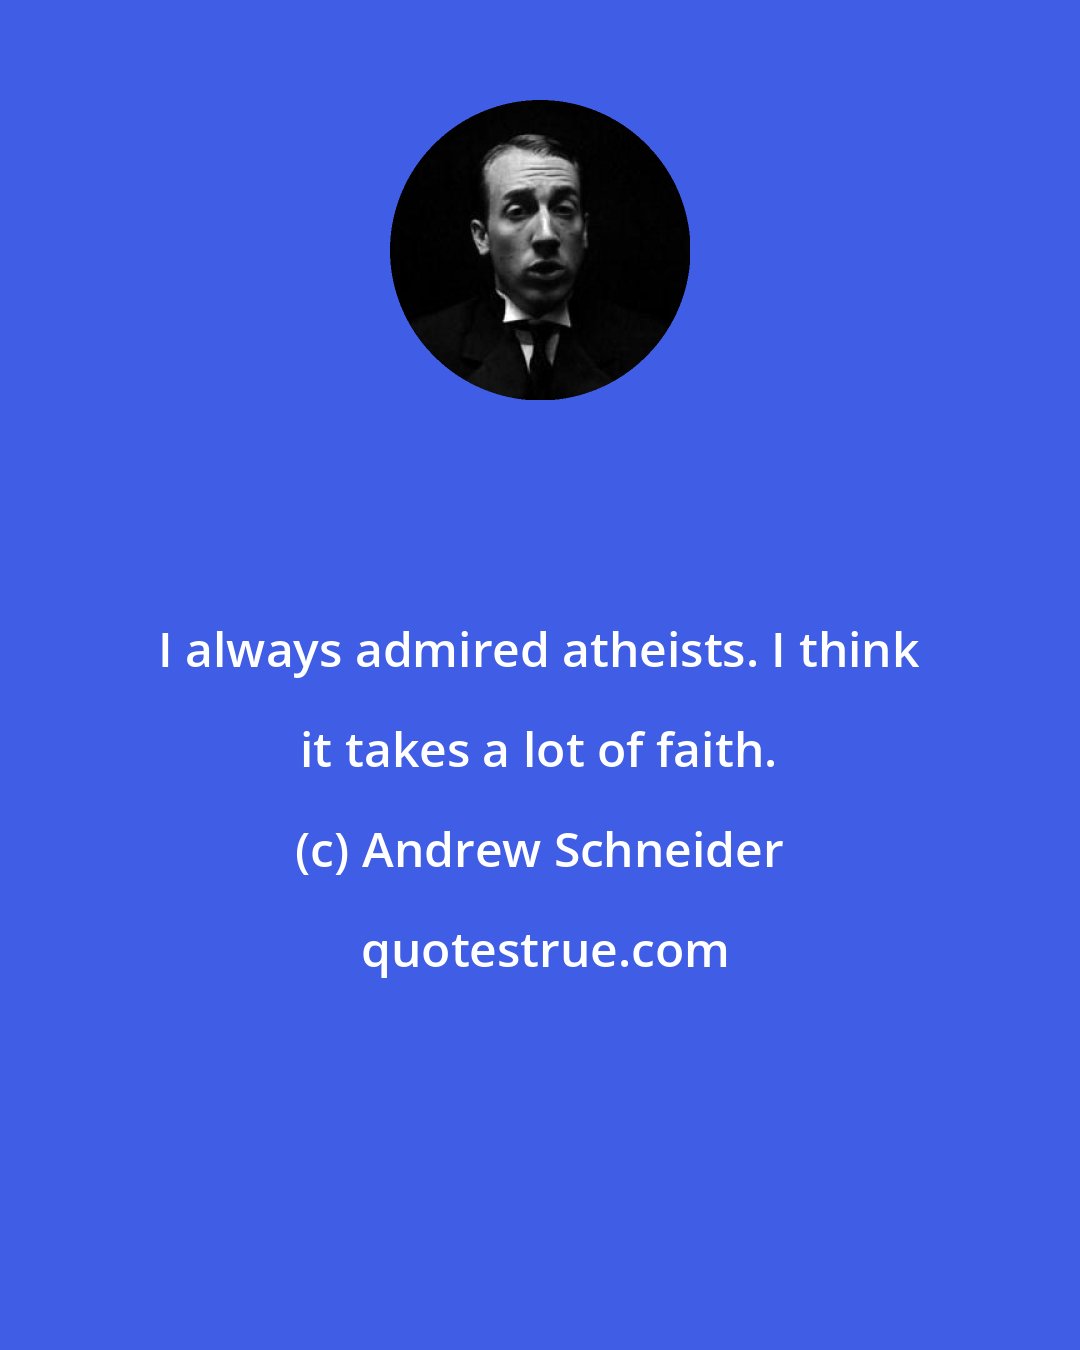 Andrew Schneider: I always admired atheists. I think it takes a lot of faith.